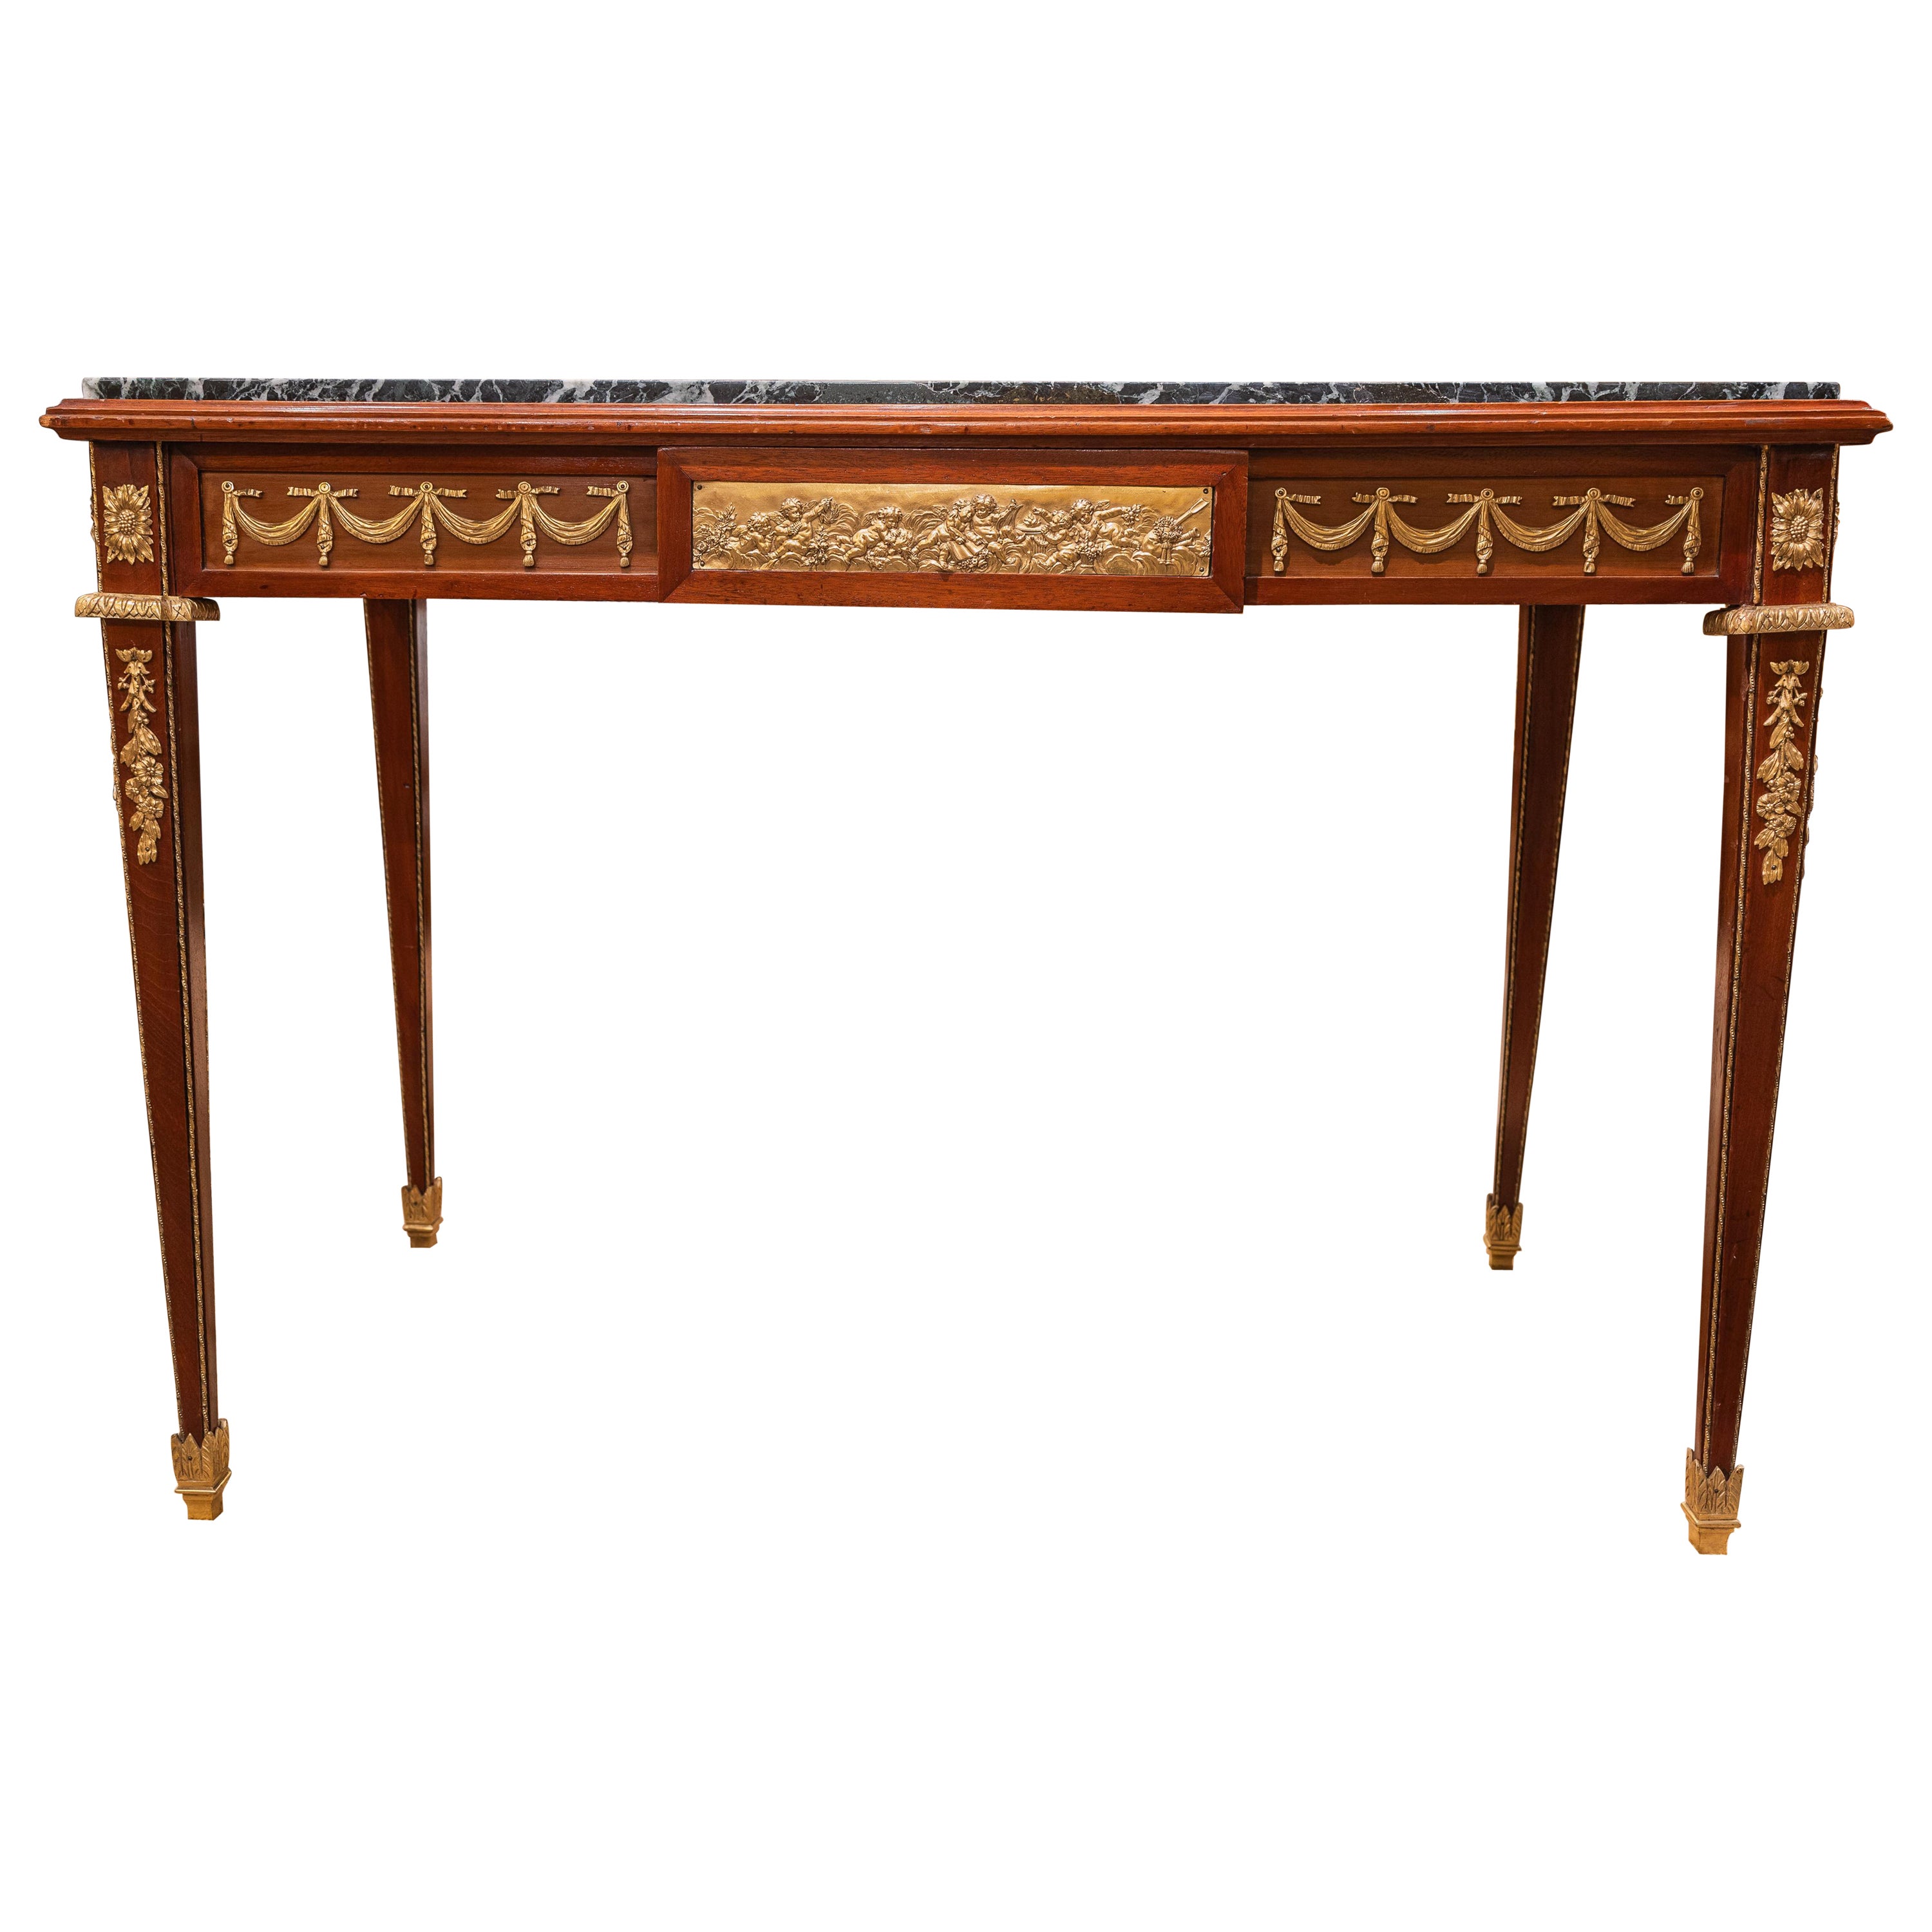 A fine 19th c French Louis XVI center table with fine gilt bronze mounts by Kahn For Sale